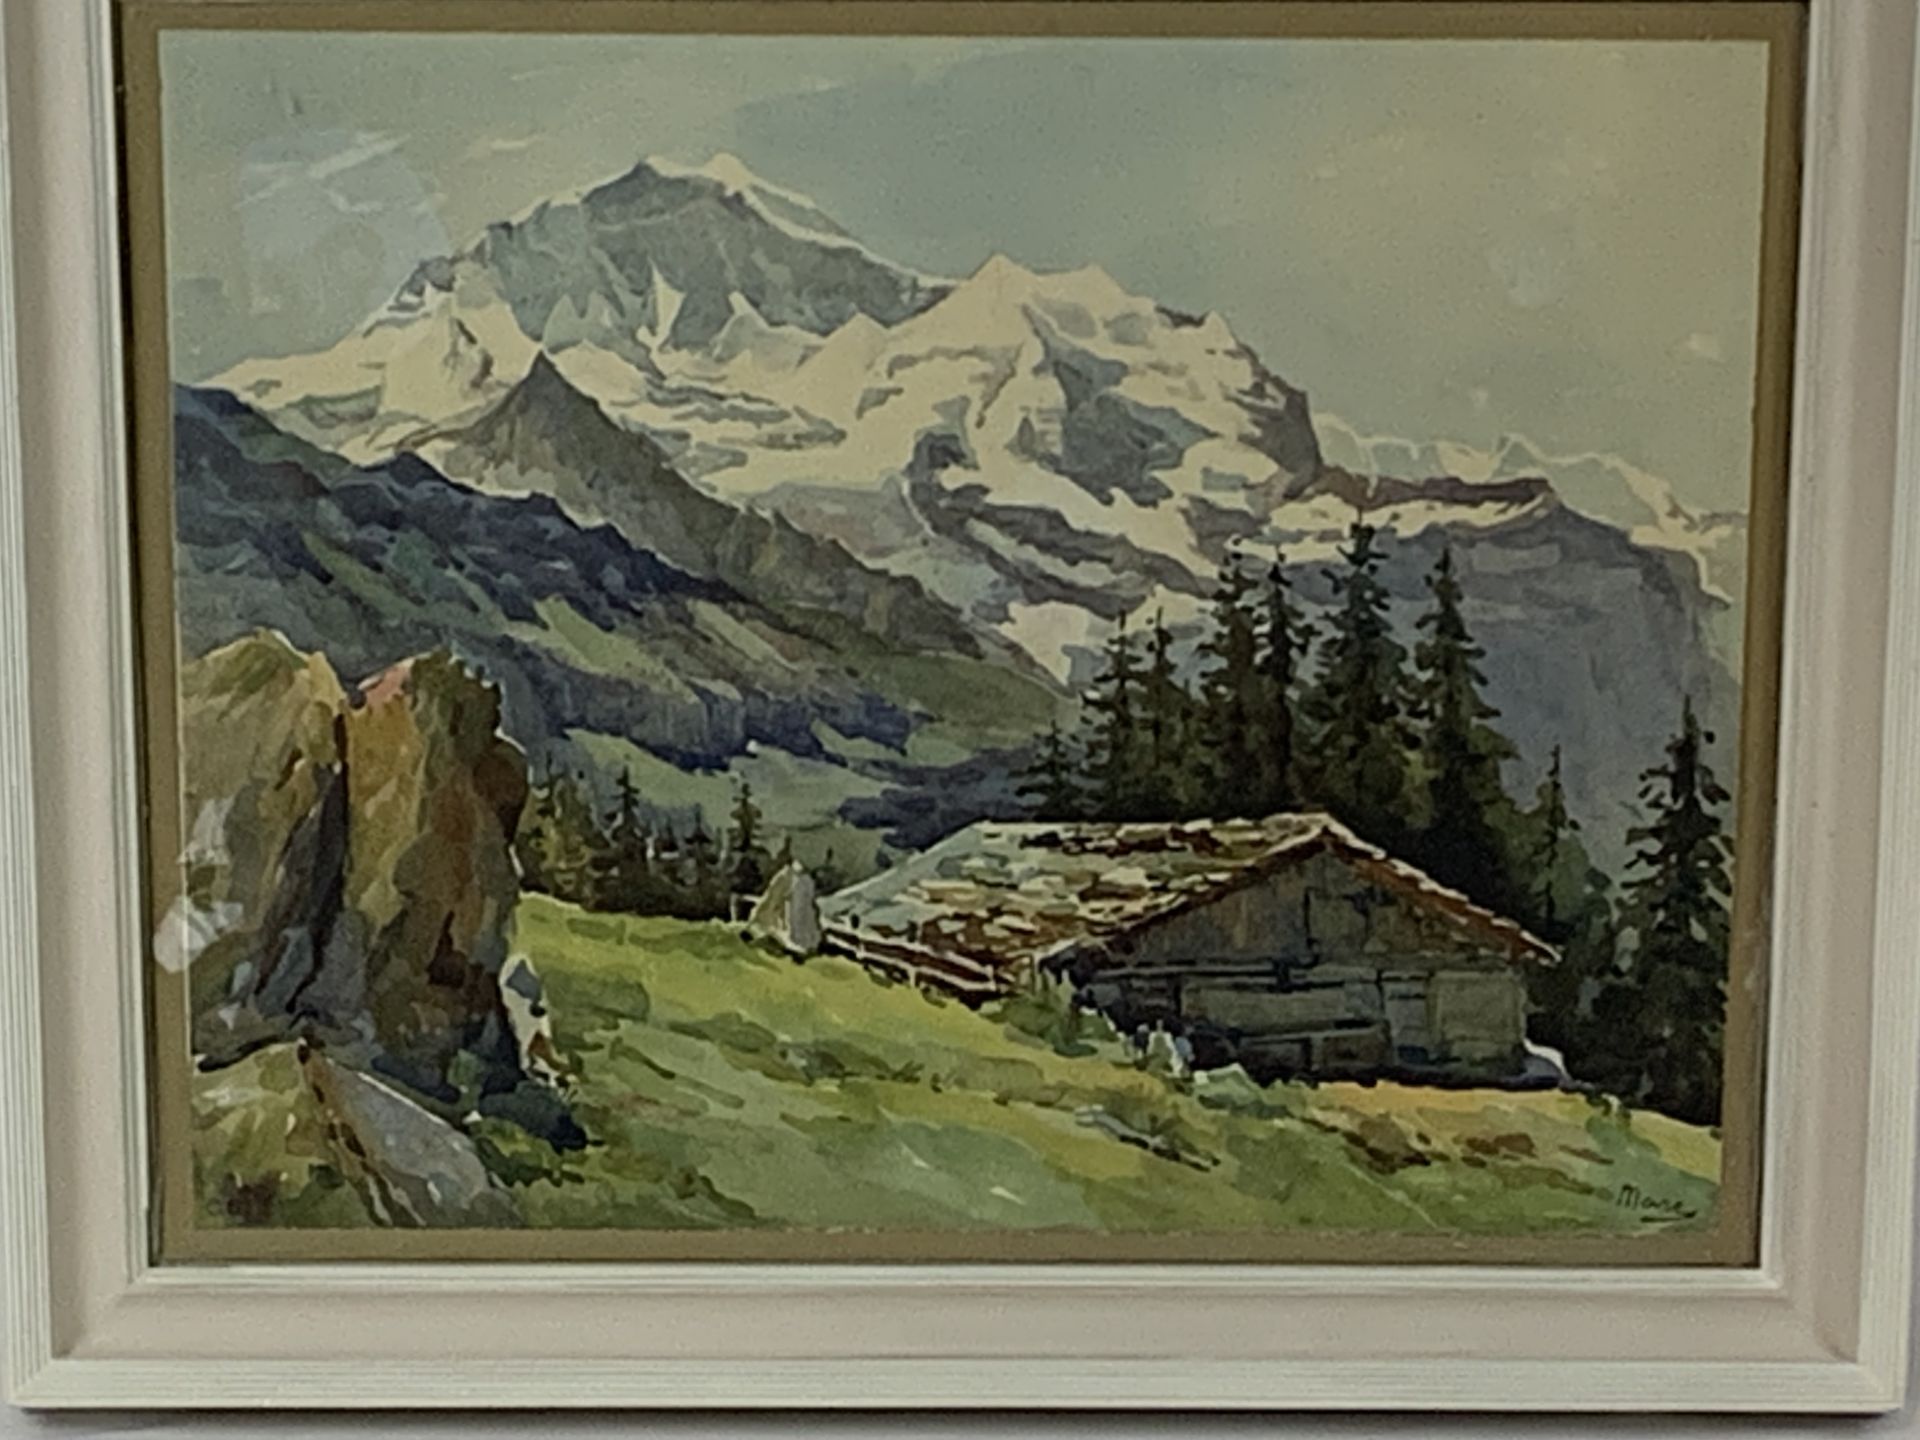 Framed and glazed lithograph of a mountain scene